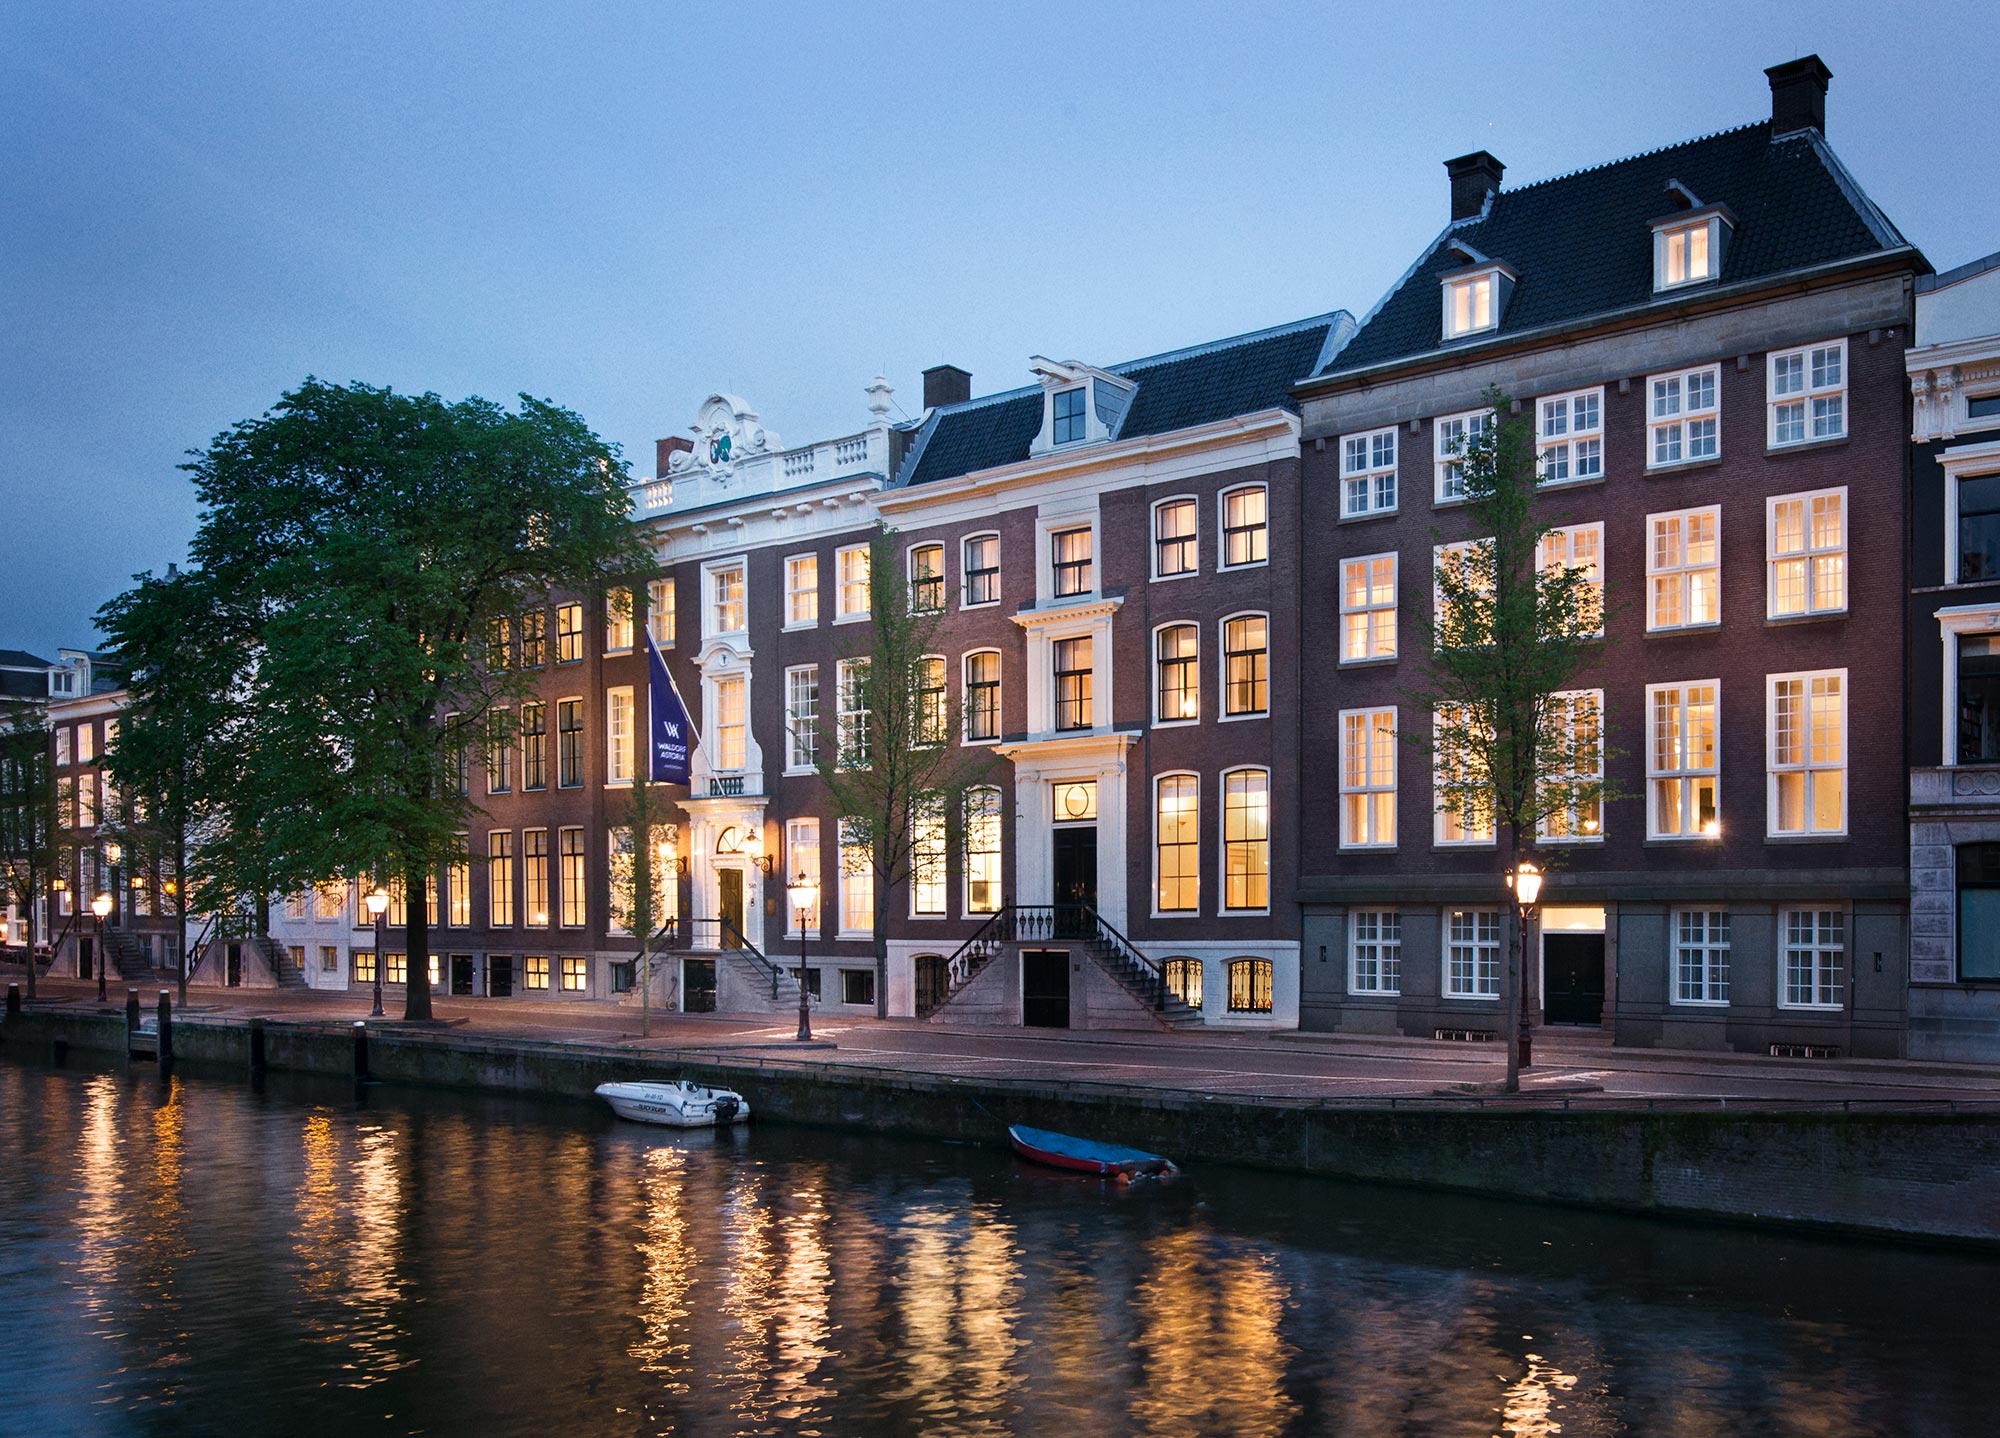 The Waldorf Astoria Amsterdam Hotel Overlooks the Amsterdam Canals